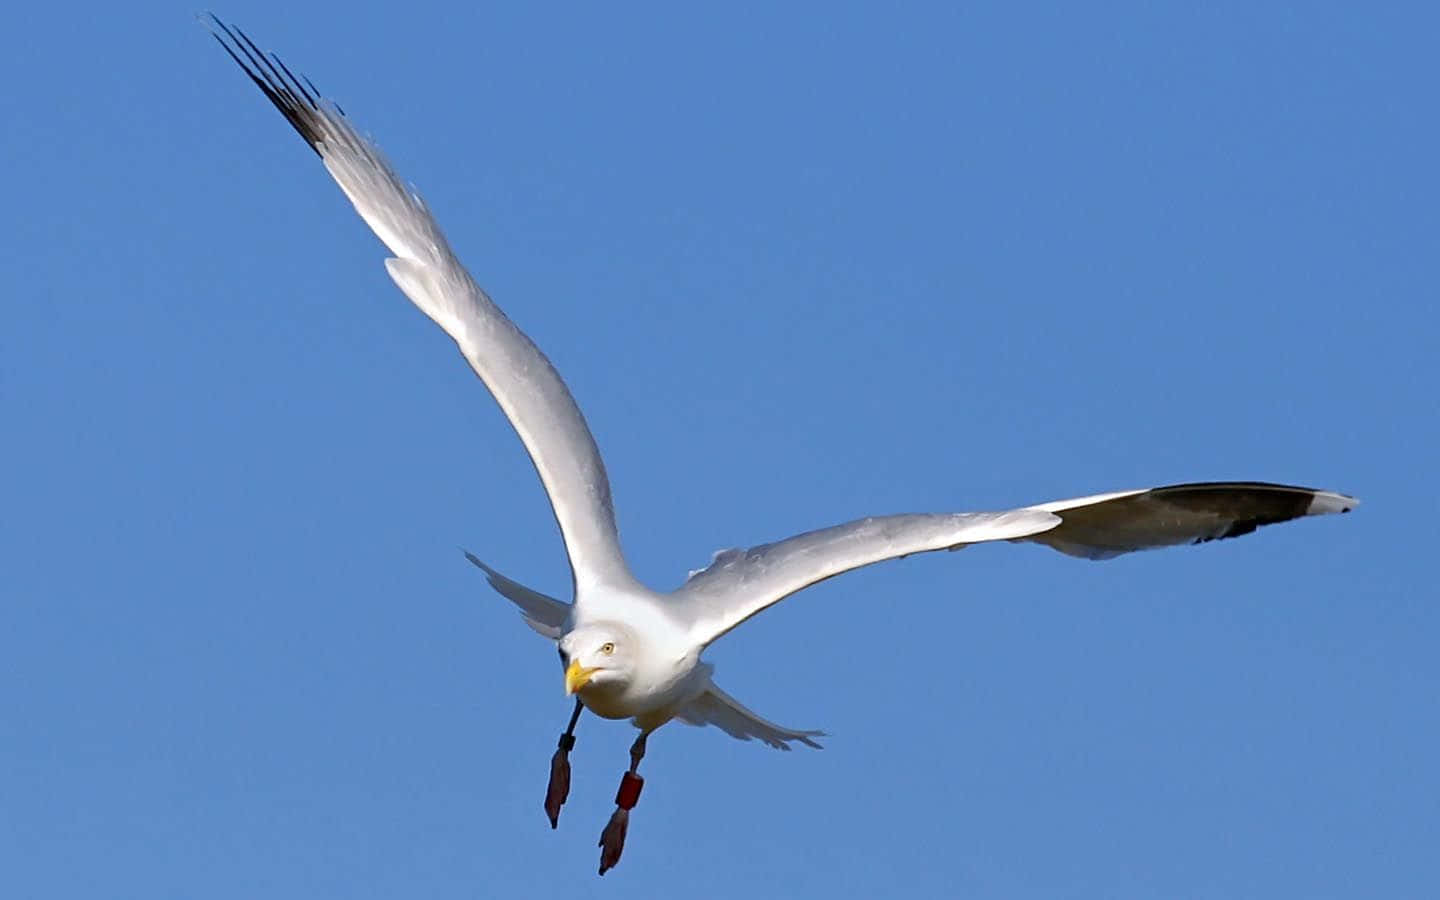 Majestic Seagull Soaring Over the Ocean Wallpaper